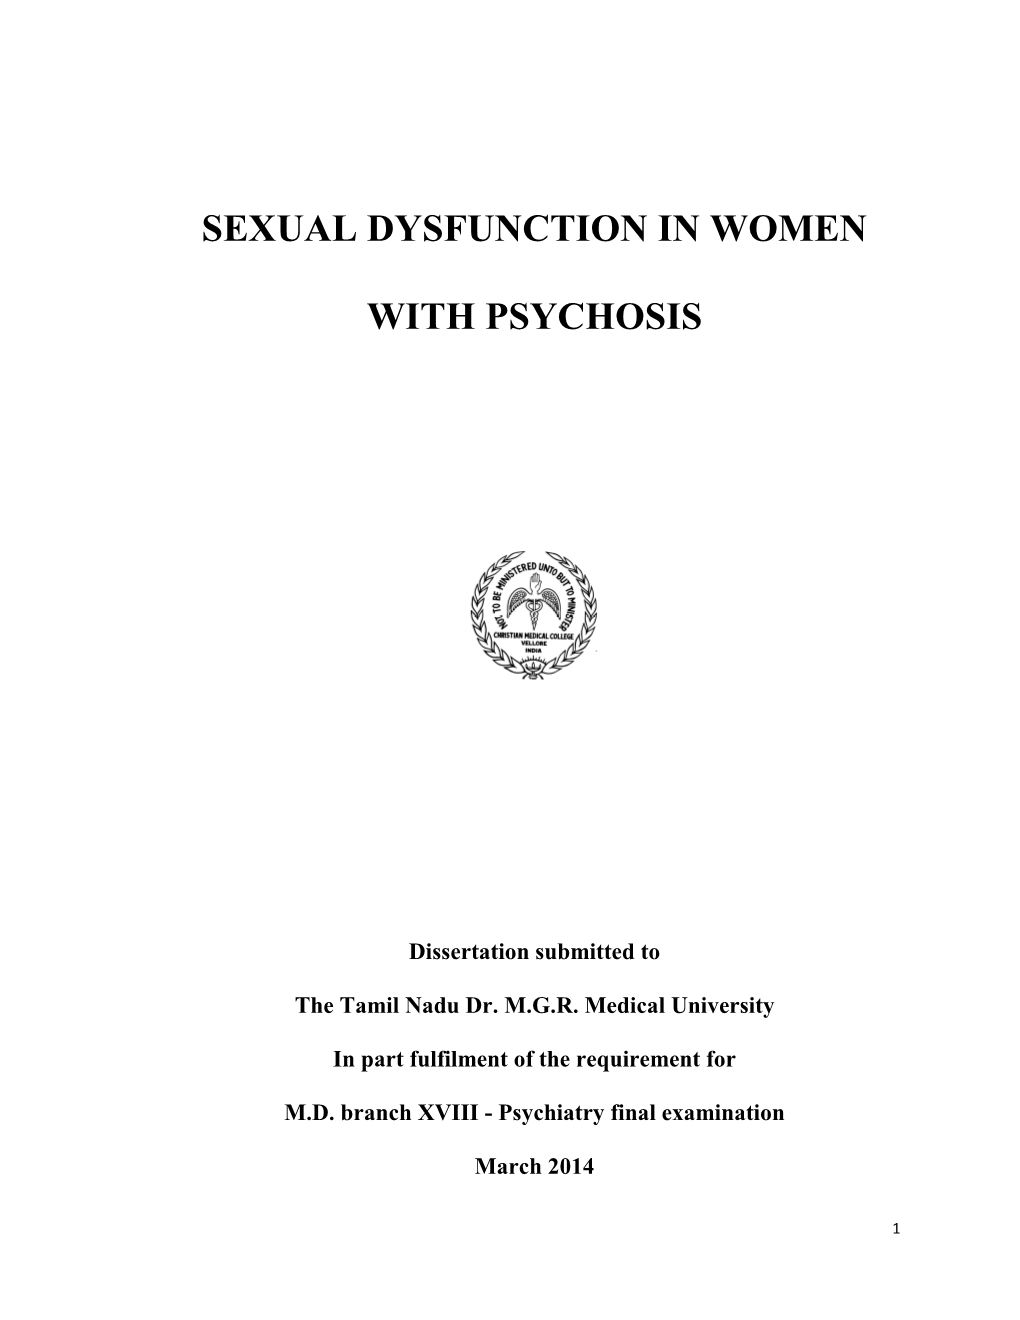 Sexual Dysfunction in Women with Psychosis ” Is the Bonafide Work of Dr.Suvarna Jyothi K Towards MD Psychiatry Degree